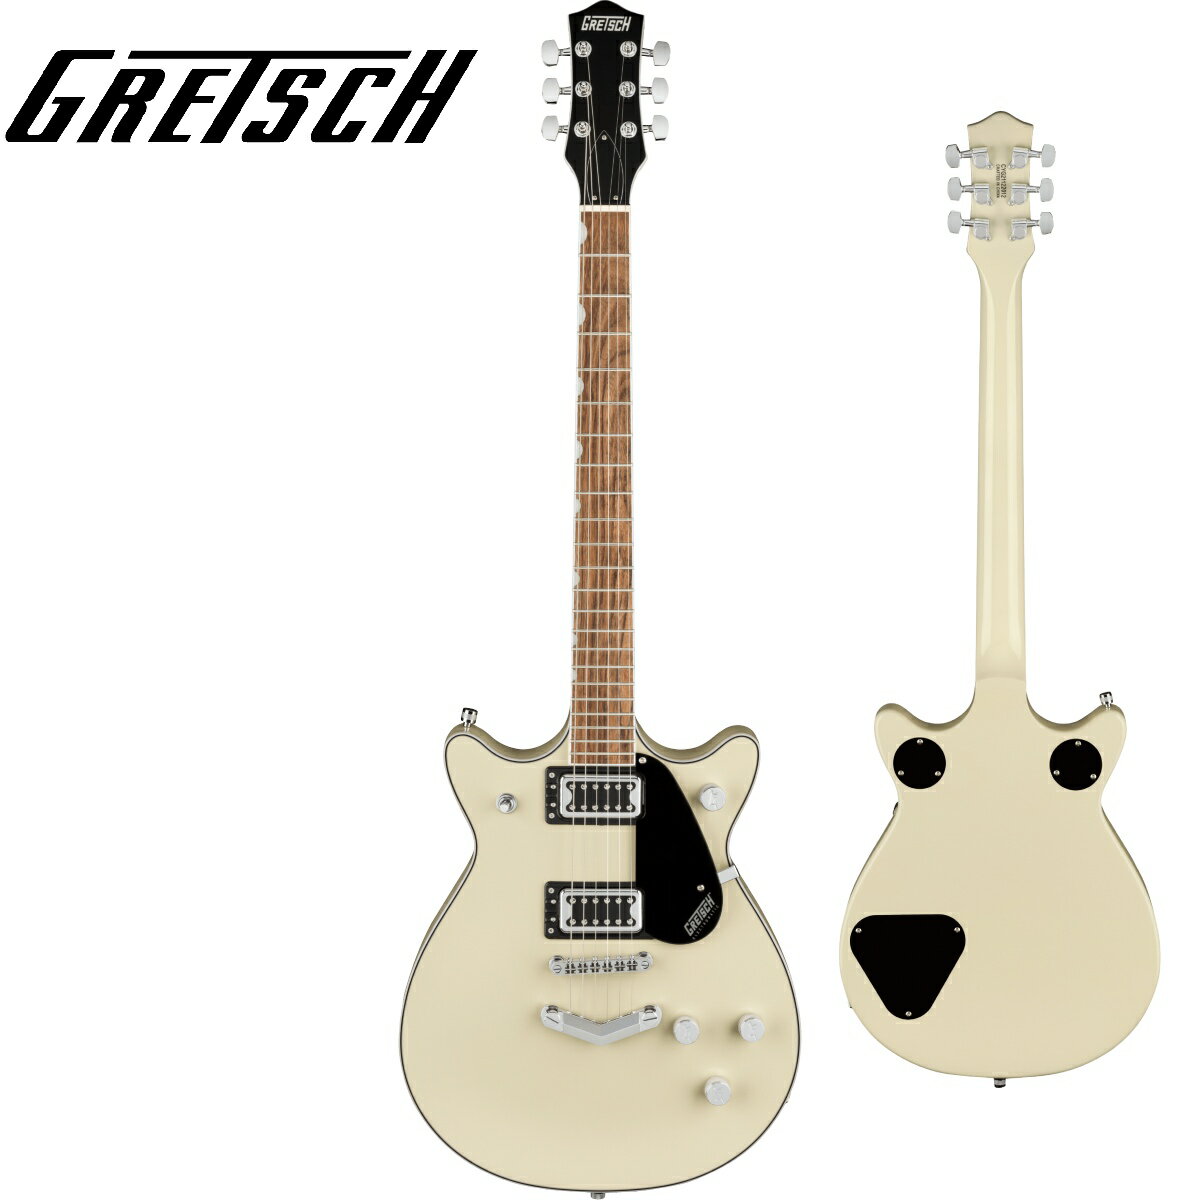 Gretsch G5222 Electromatic Double Jet BT with V-Stoptail -Vintage White- 新品[グレッチ][白,ホワイト][Guitar,ギター]